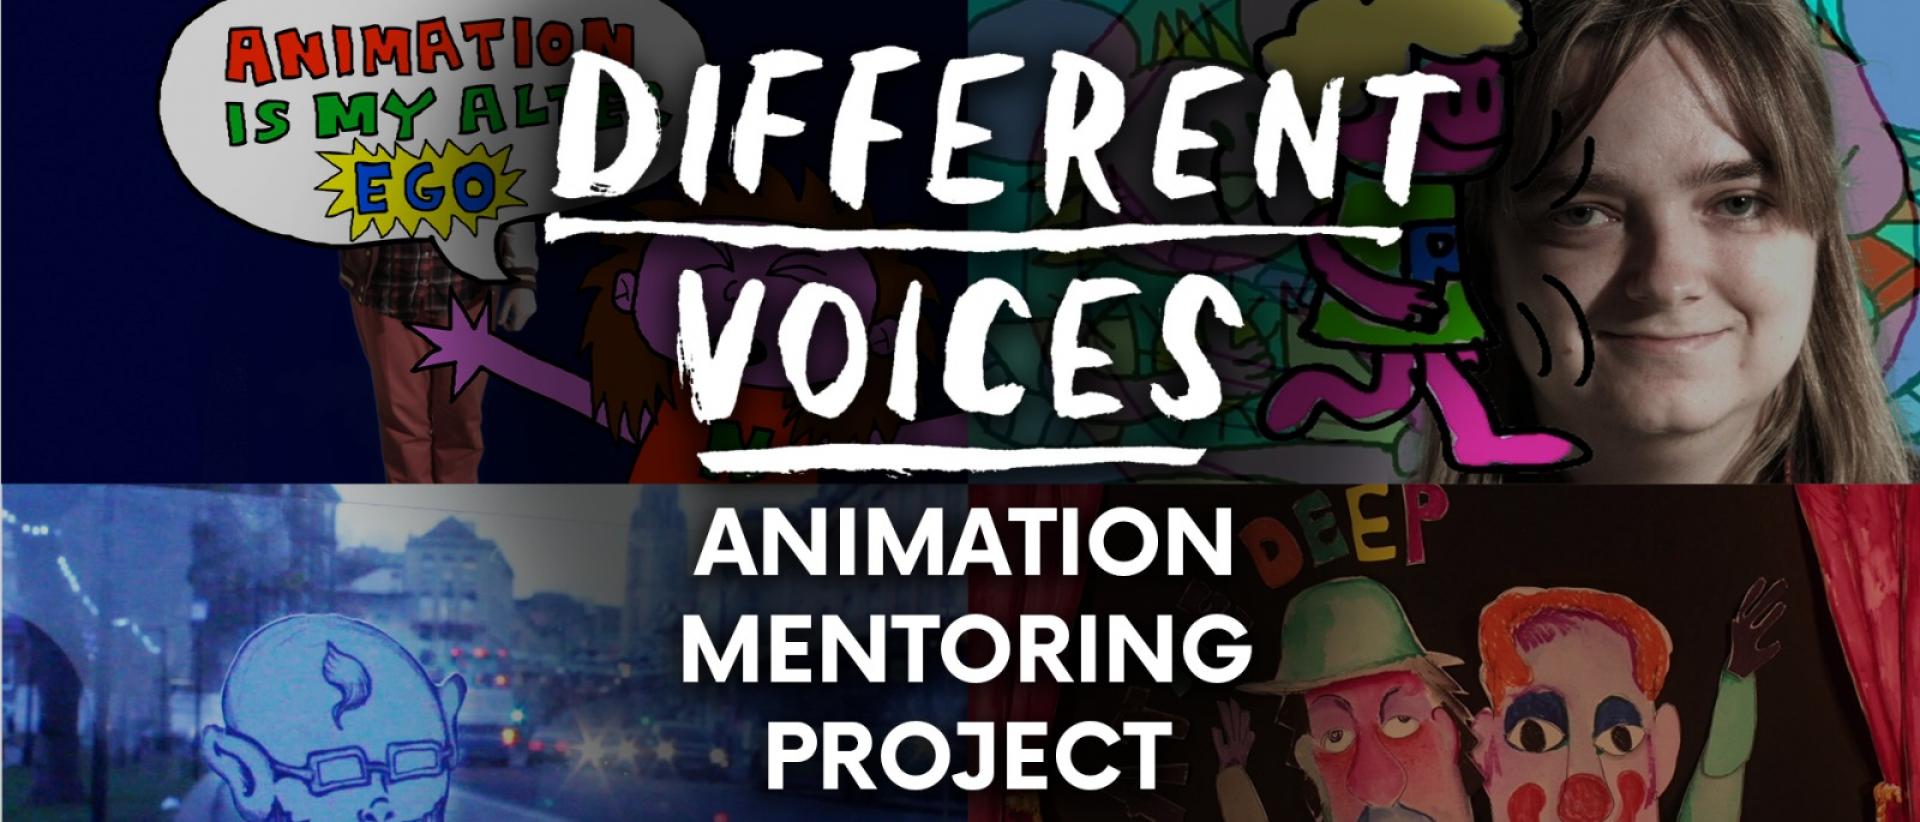 Different Voices animation mentoring project